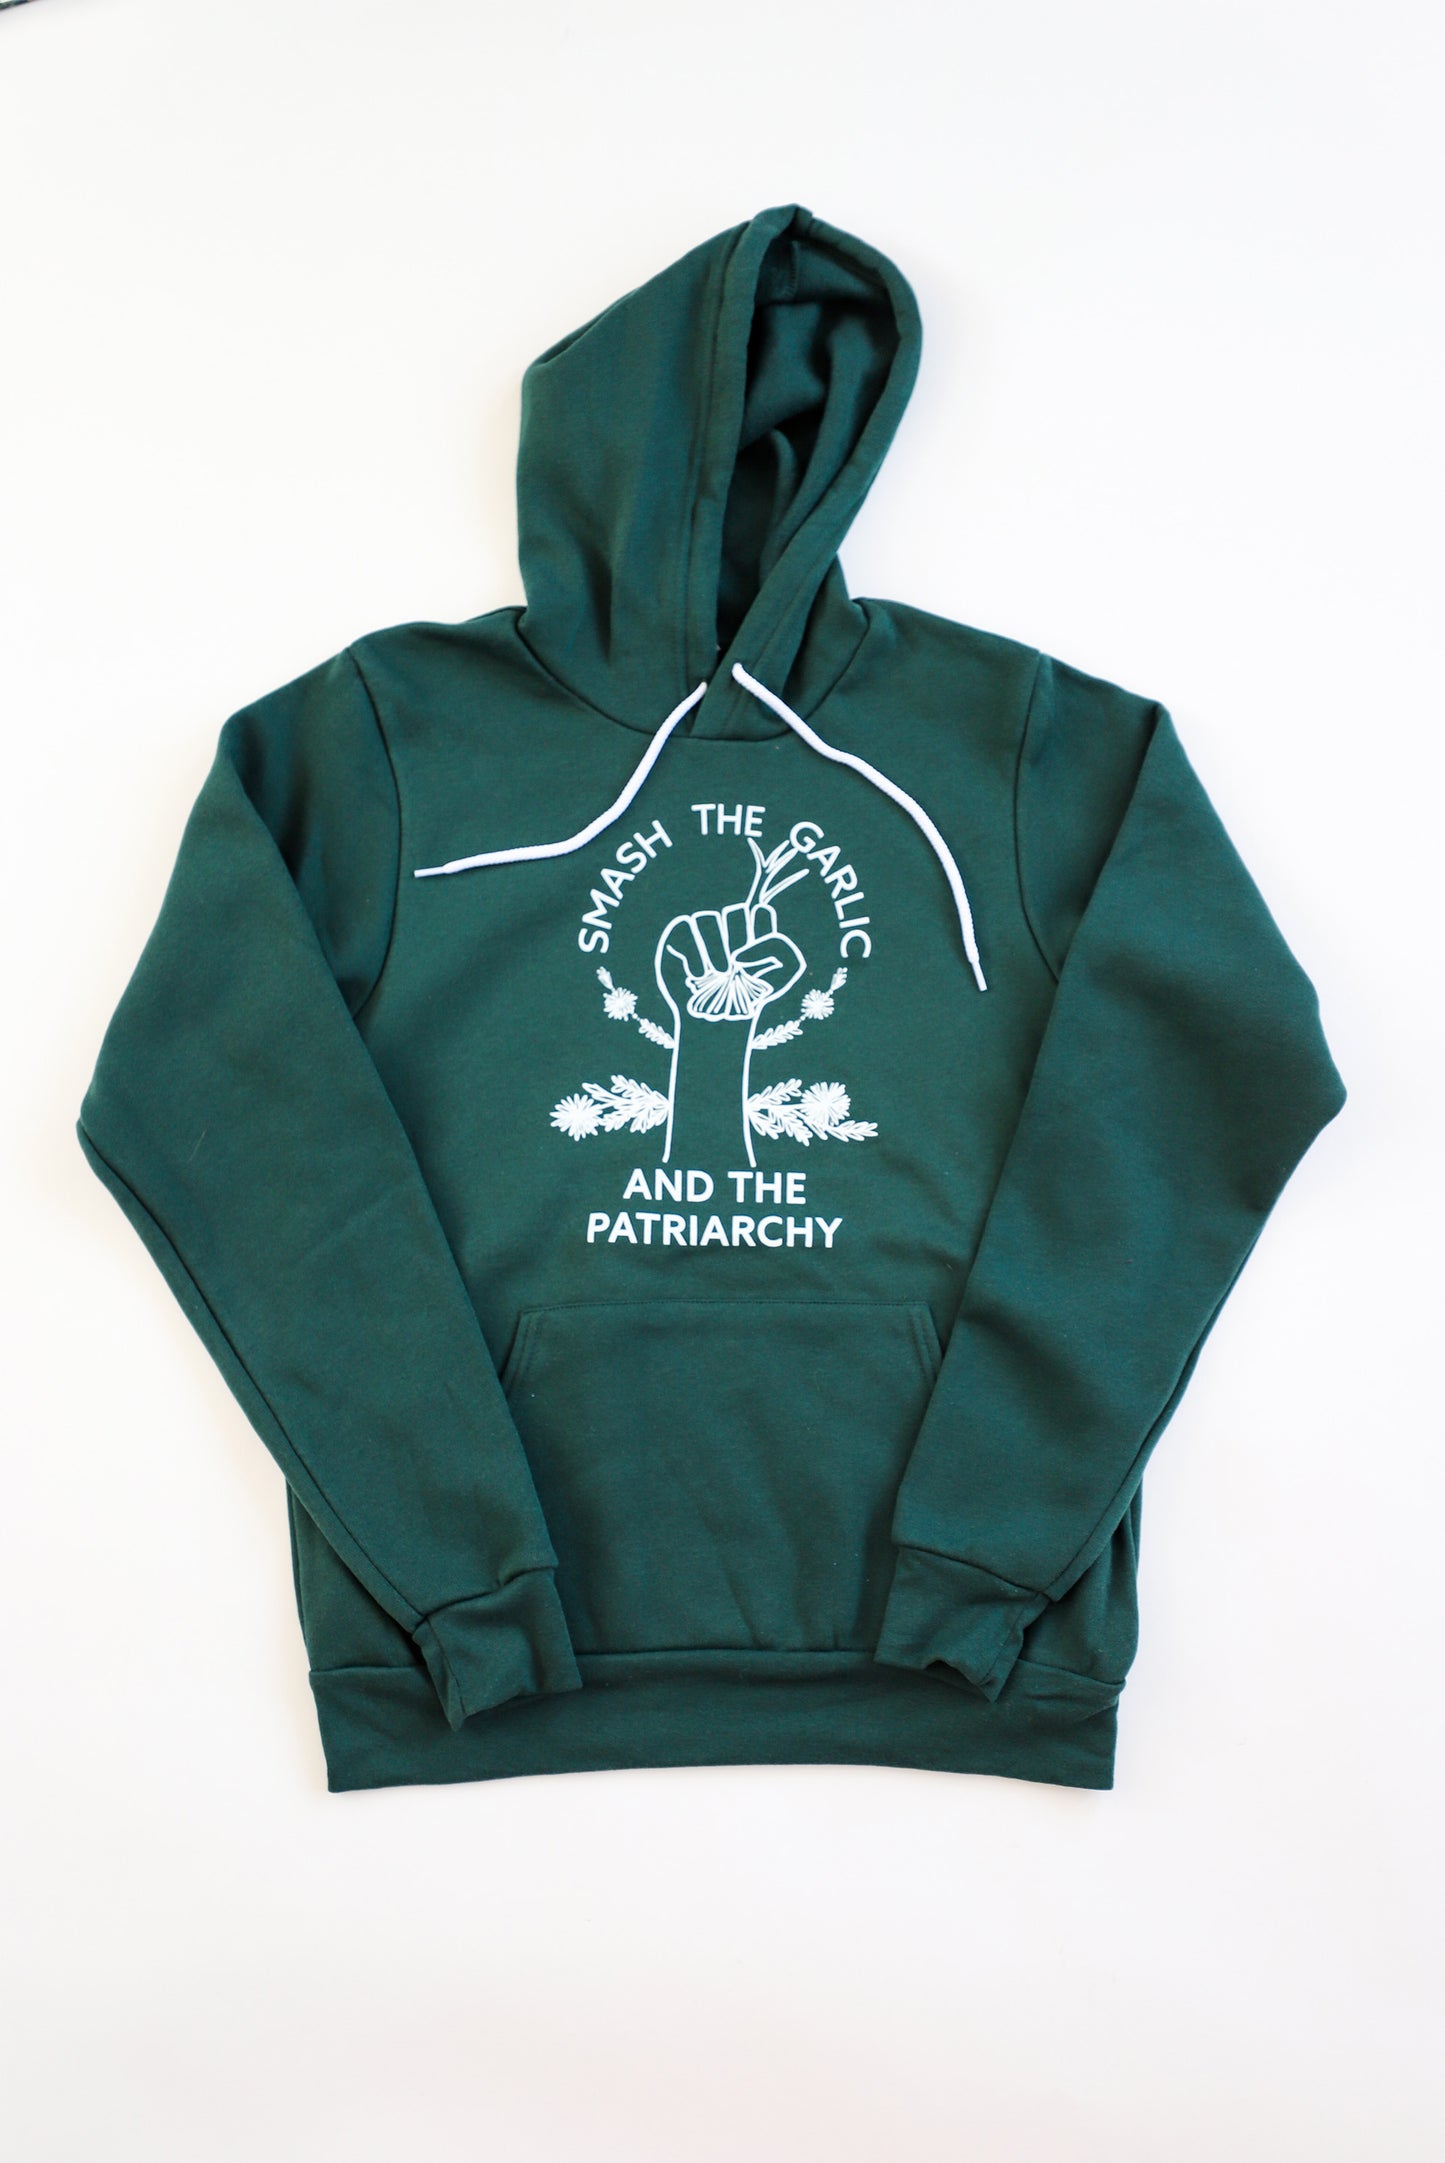 A dark green hoodie with the words "Smash the Garlic and the Patriarchy" and an illustration of a hand holding garlic